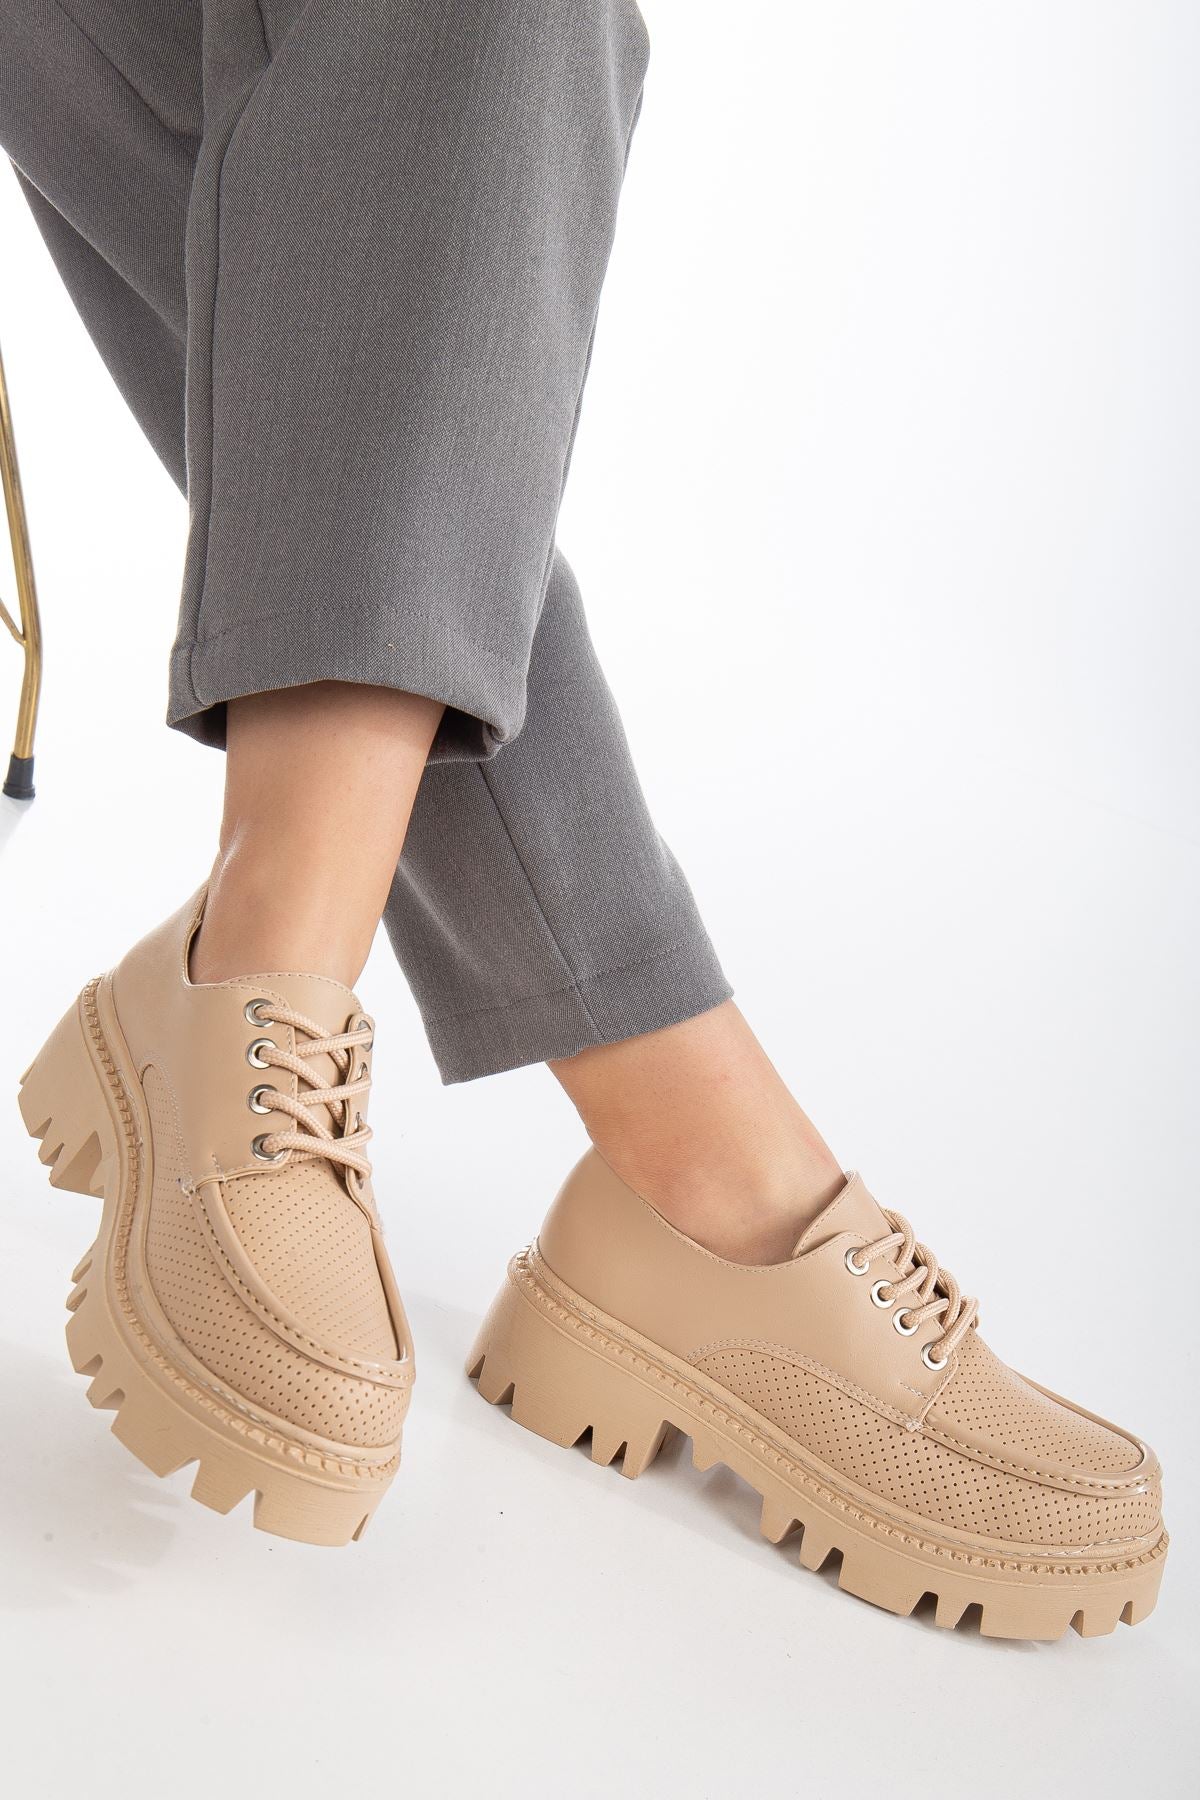 Women's Nude Lacing Detailed Oxford Shoes - STREETMODE™